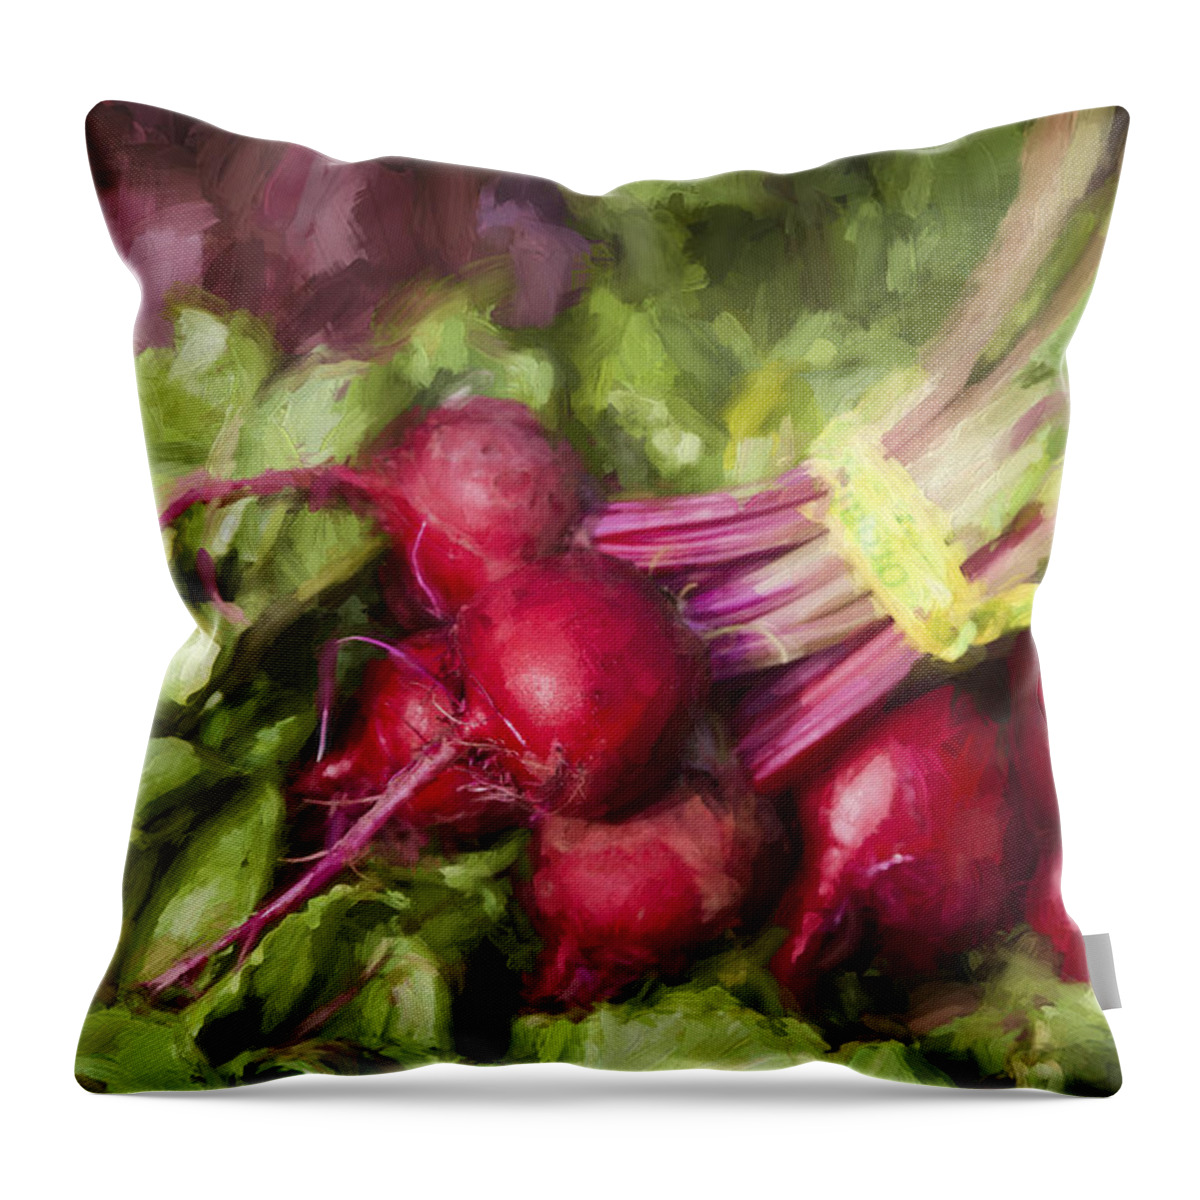 Farmers Throw Pillow featuring the digital art Farmers Market Beets by Carol Leigh